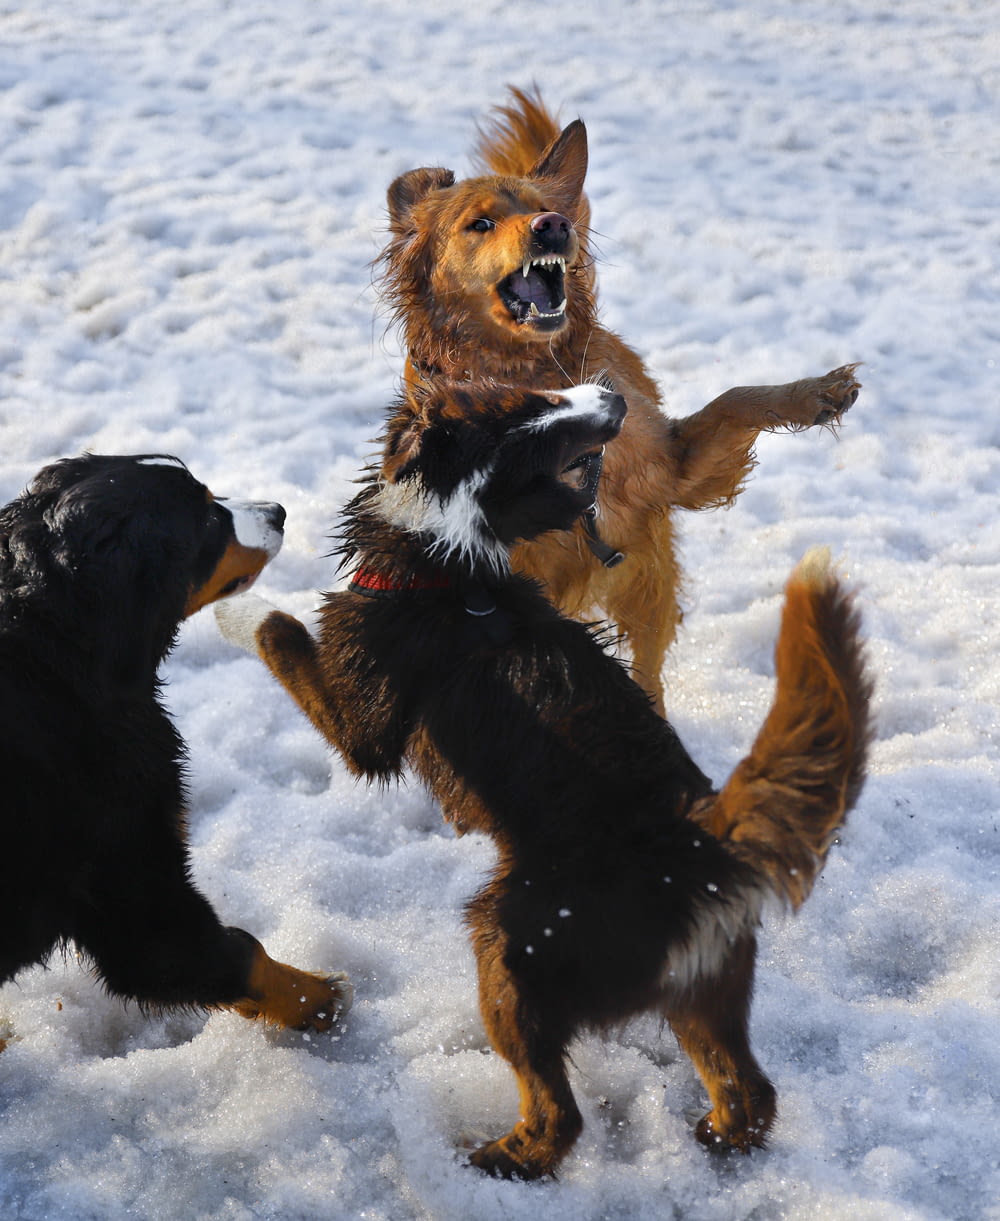 black and brown short coated dog running on snow covered ground during daytime